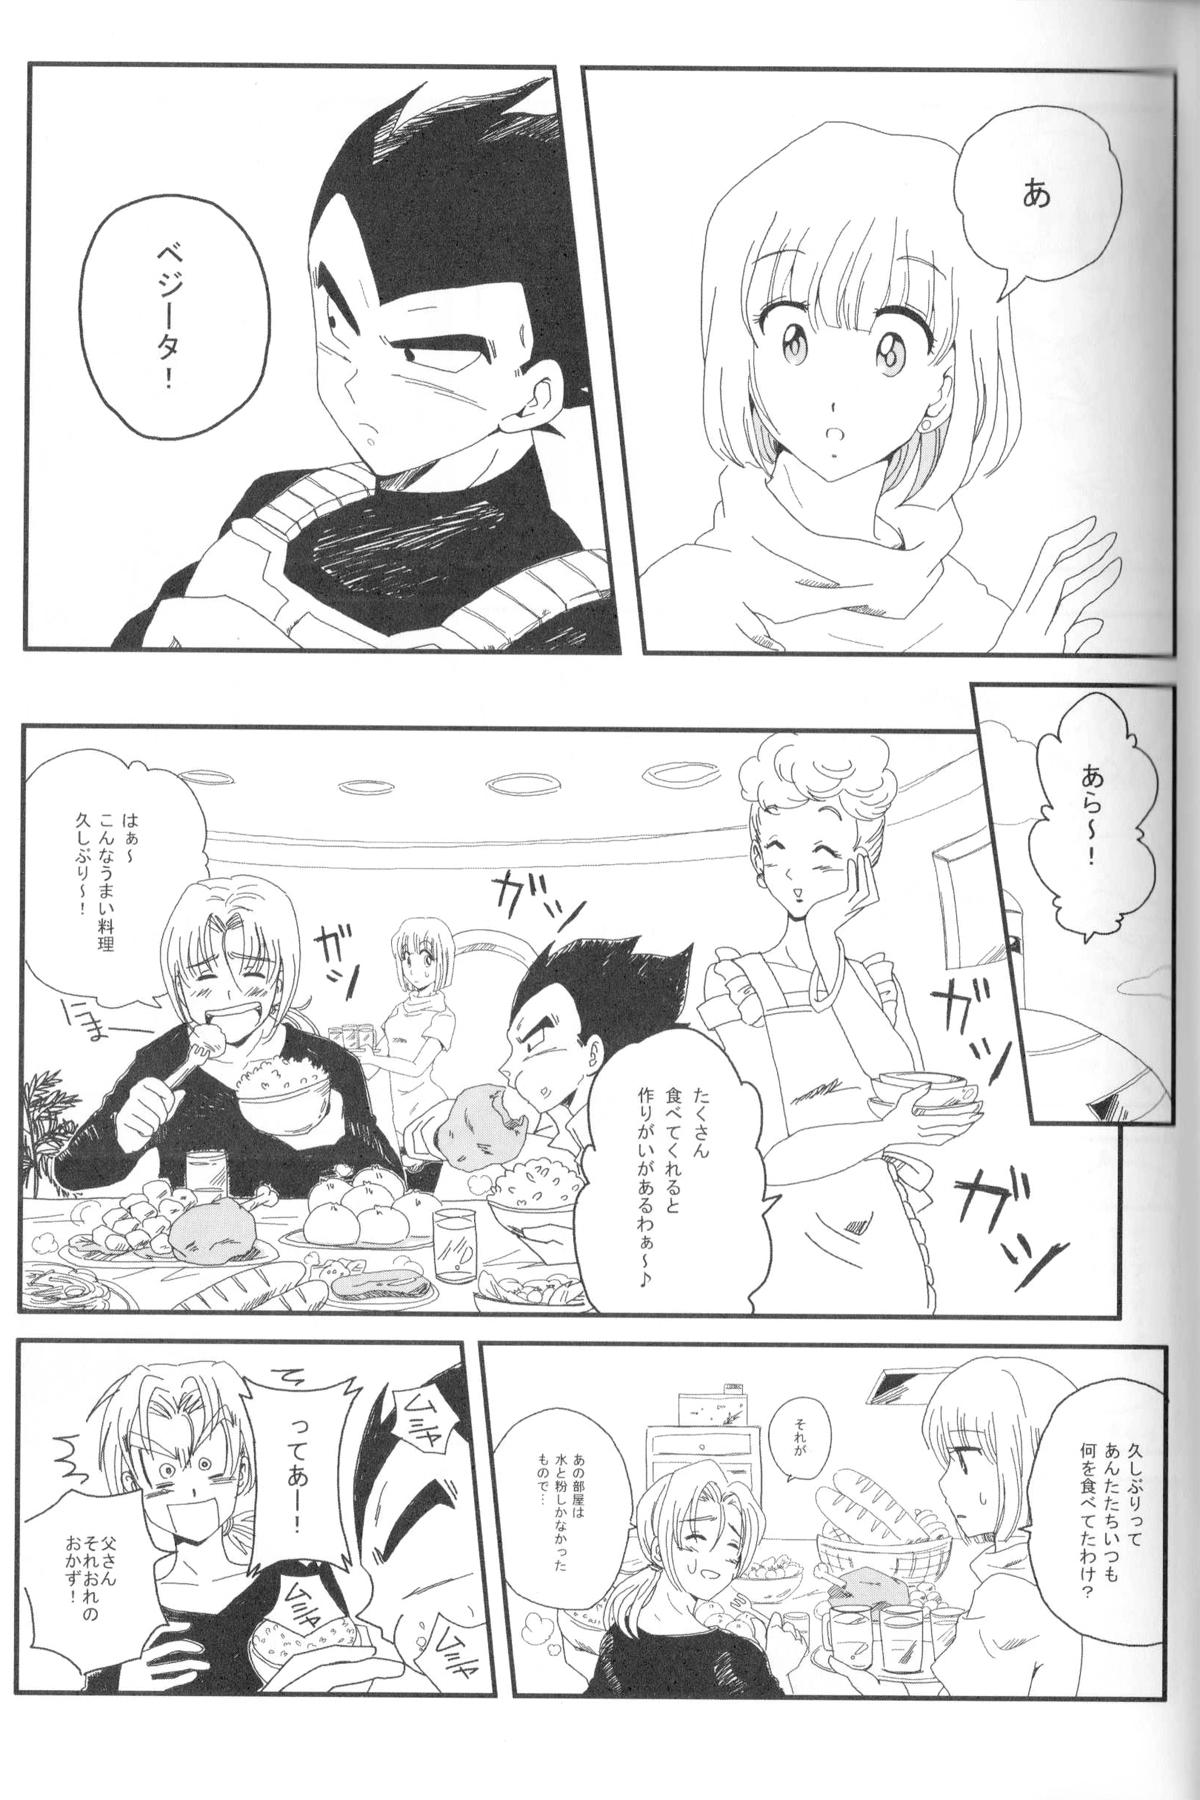 Abg Pure Love - Dragon ball z Babysitter - Page 4